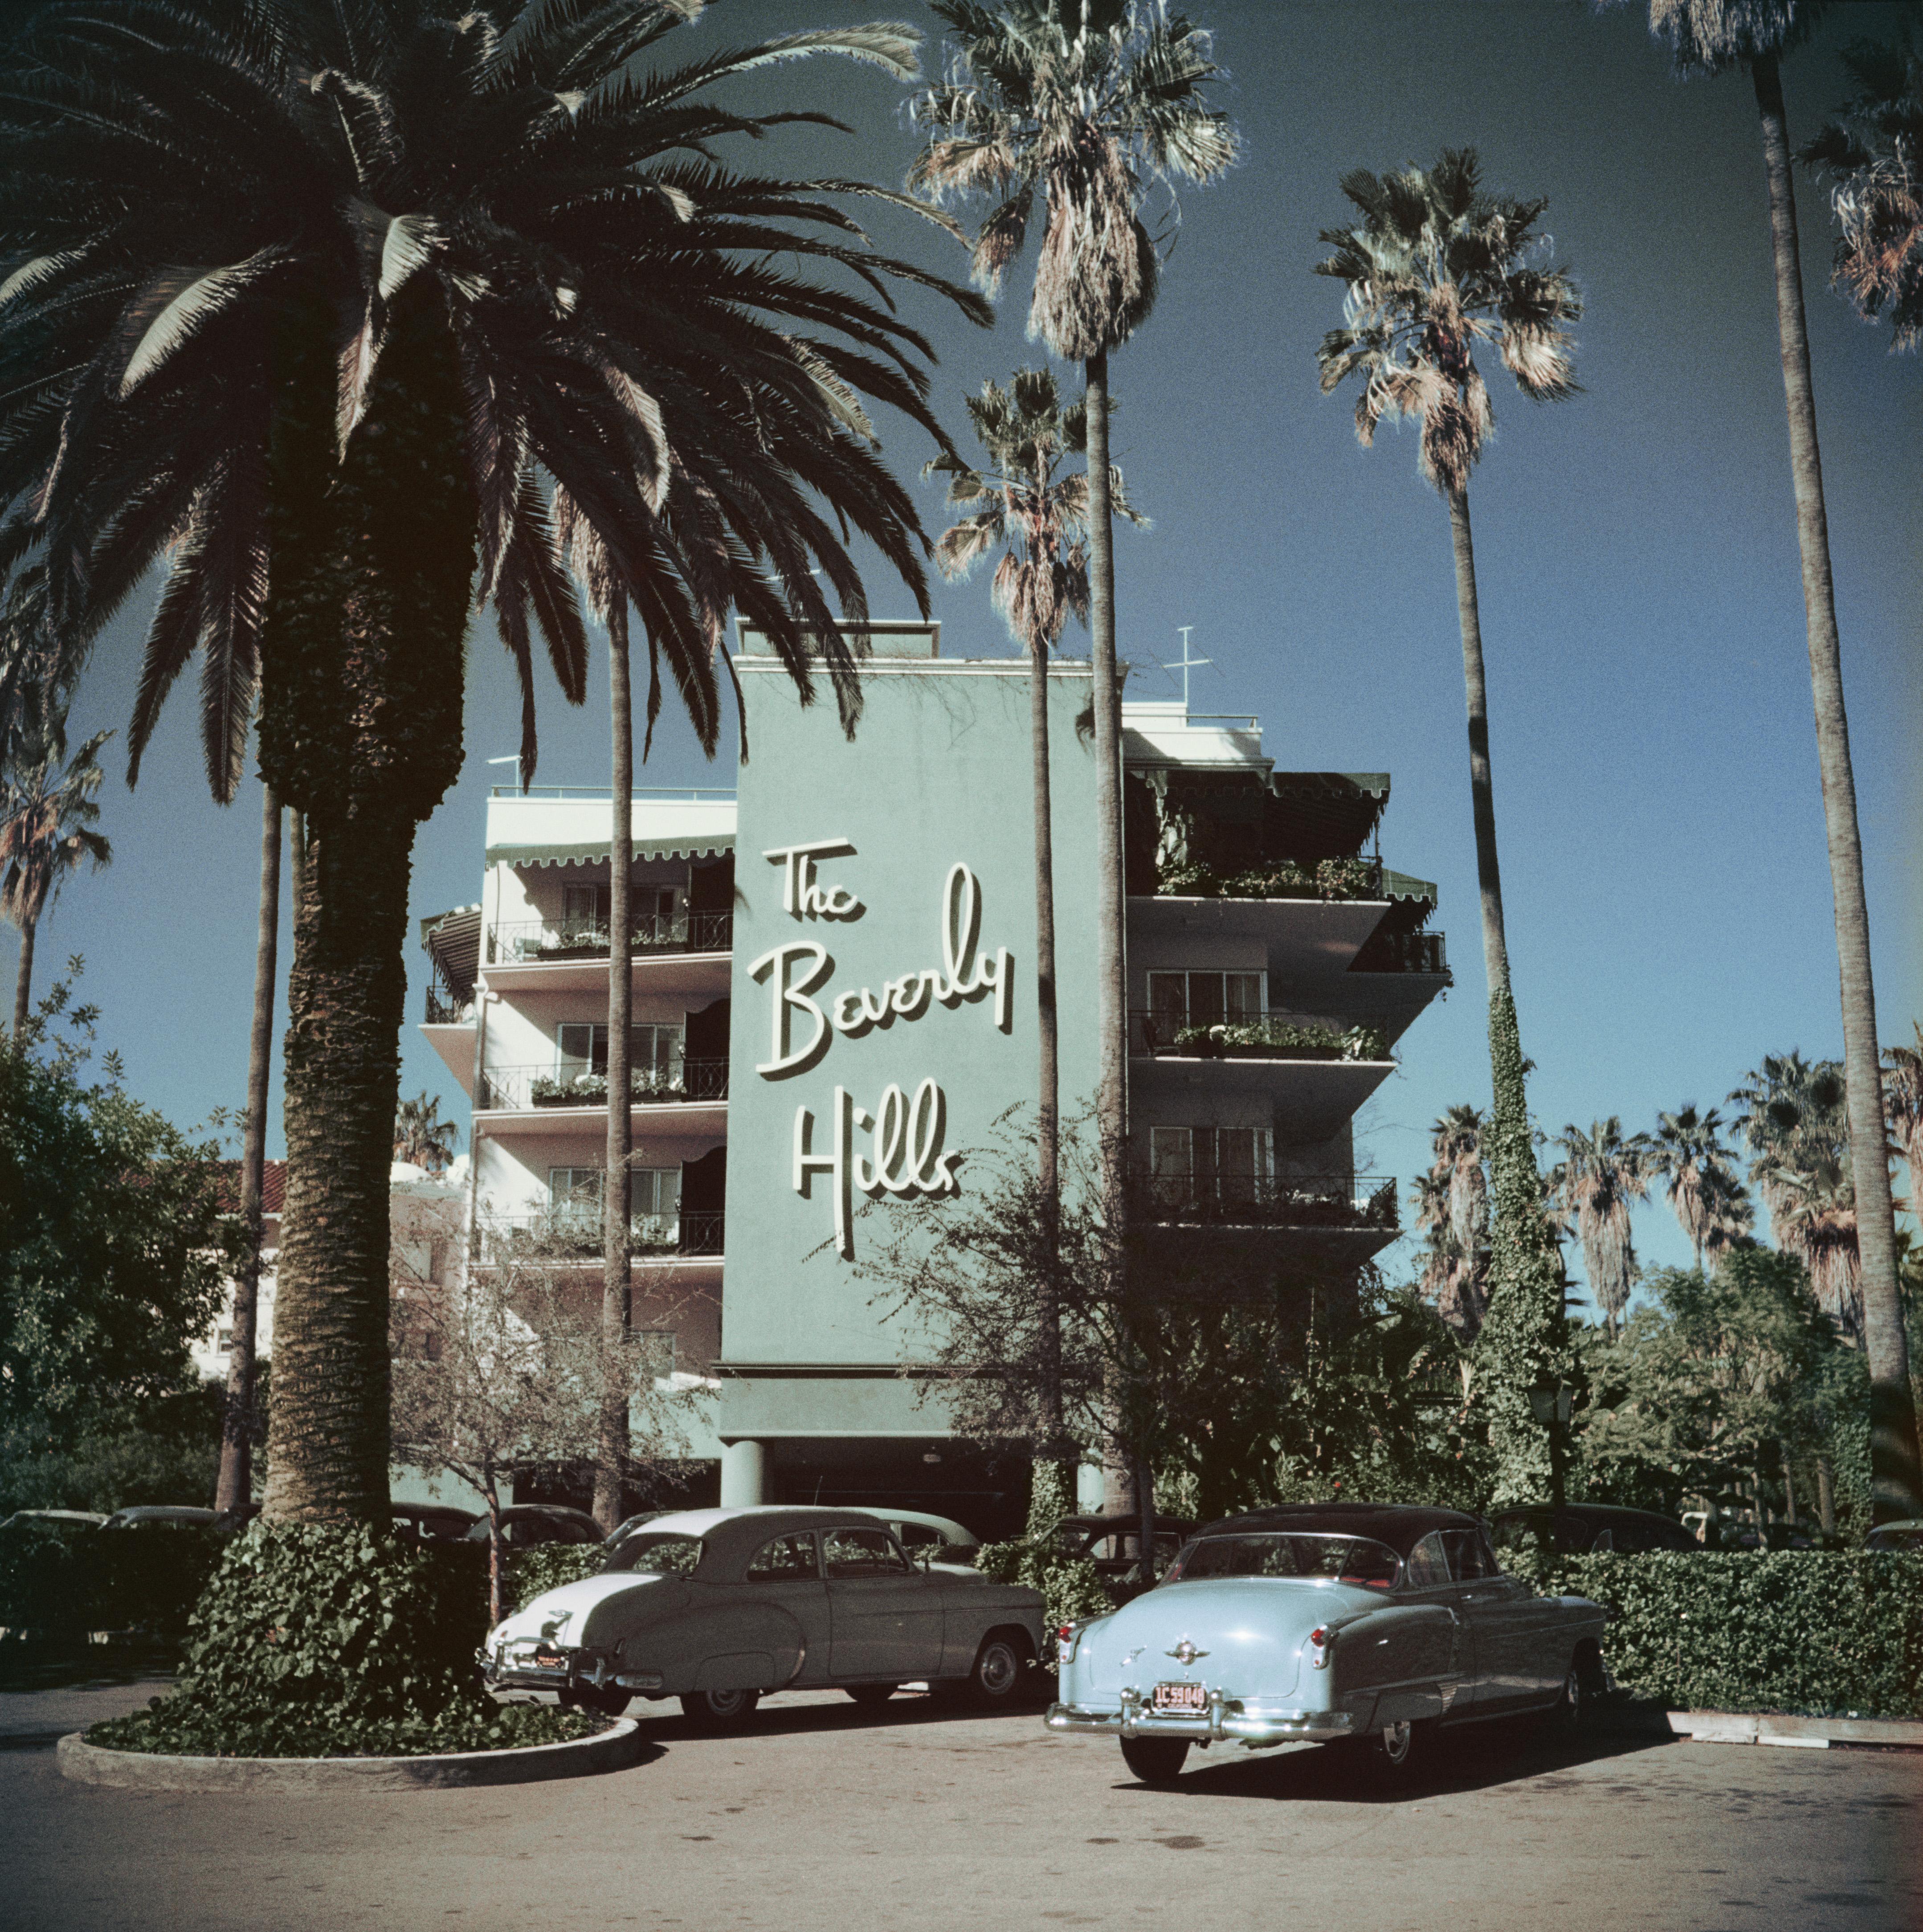 Slim Aarons
Beverly Hills Hotel, 1957
C print
Estate stamped and numbered edition of 150 
with Certificate of authenticity

Cars parked outside the Beverly Hills Hotel on Sunset Boulevard in California, 1957.

Slim Aarons (1916-2006) worked mainly